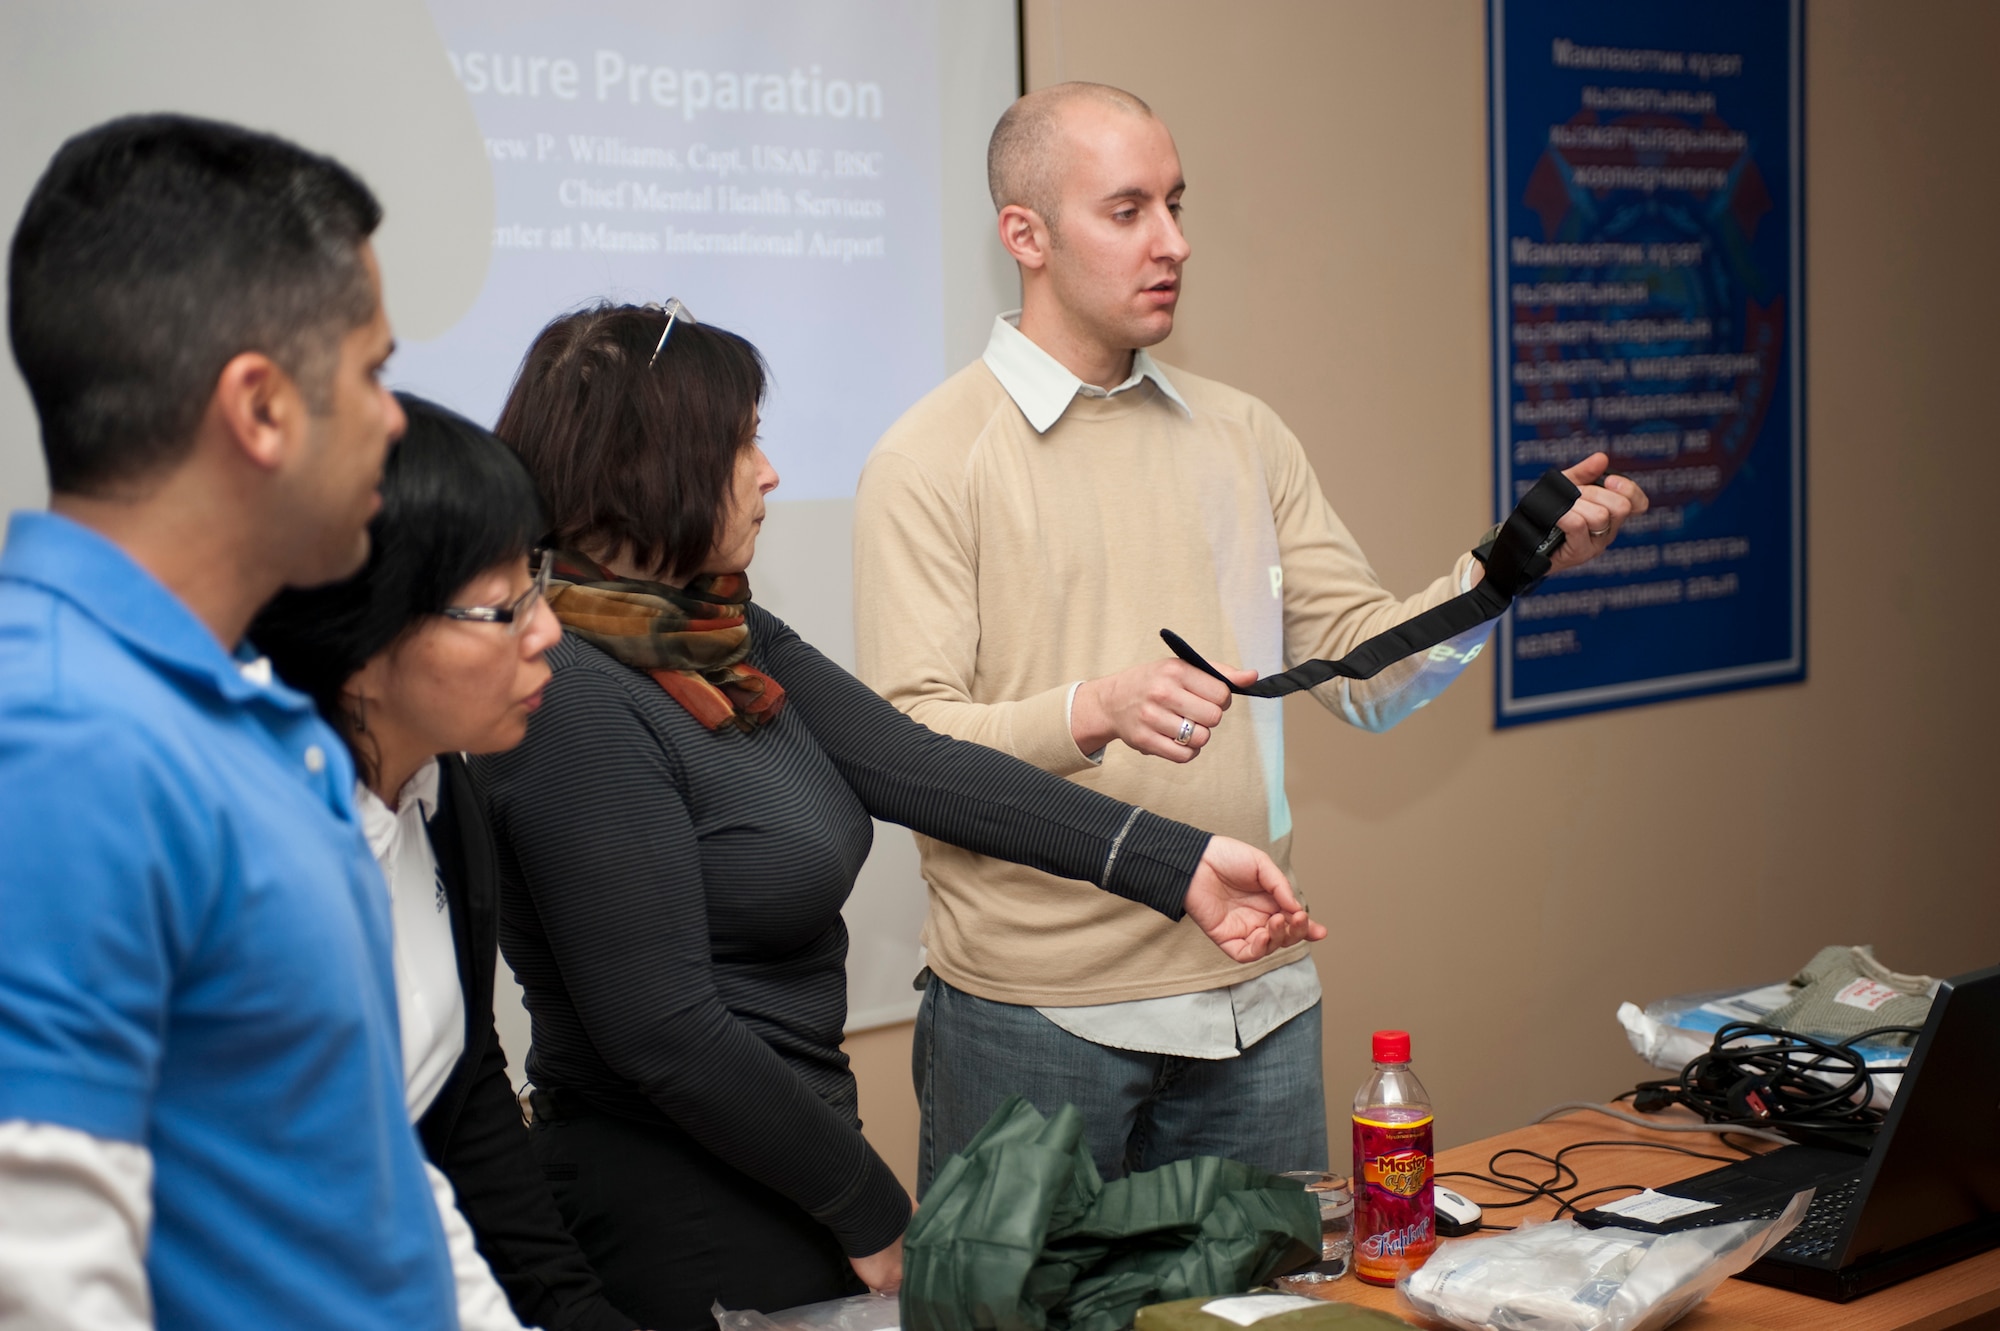 BISHKEK, Kyrgyzstan - Dr. (Capt.) Lance Black of the Transit Center at Manas gets ready to demonstrate how to use a tourniquet to members of the Kyrgyz Presidential Medical Team during a training session Nov. 24. (U.S. Air Force Photo/Staff Sgt. Michael Schocker)